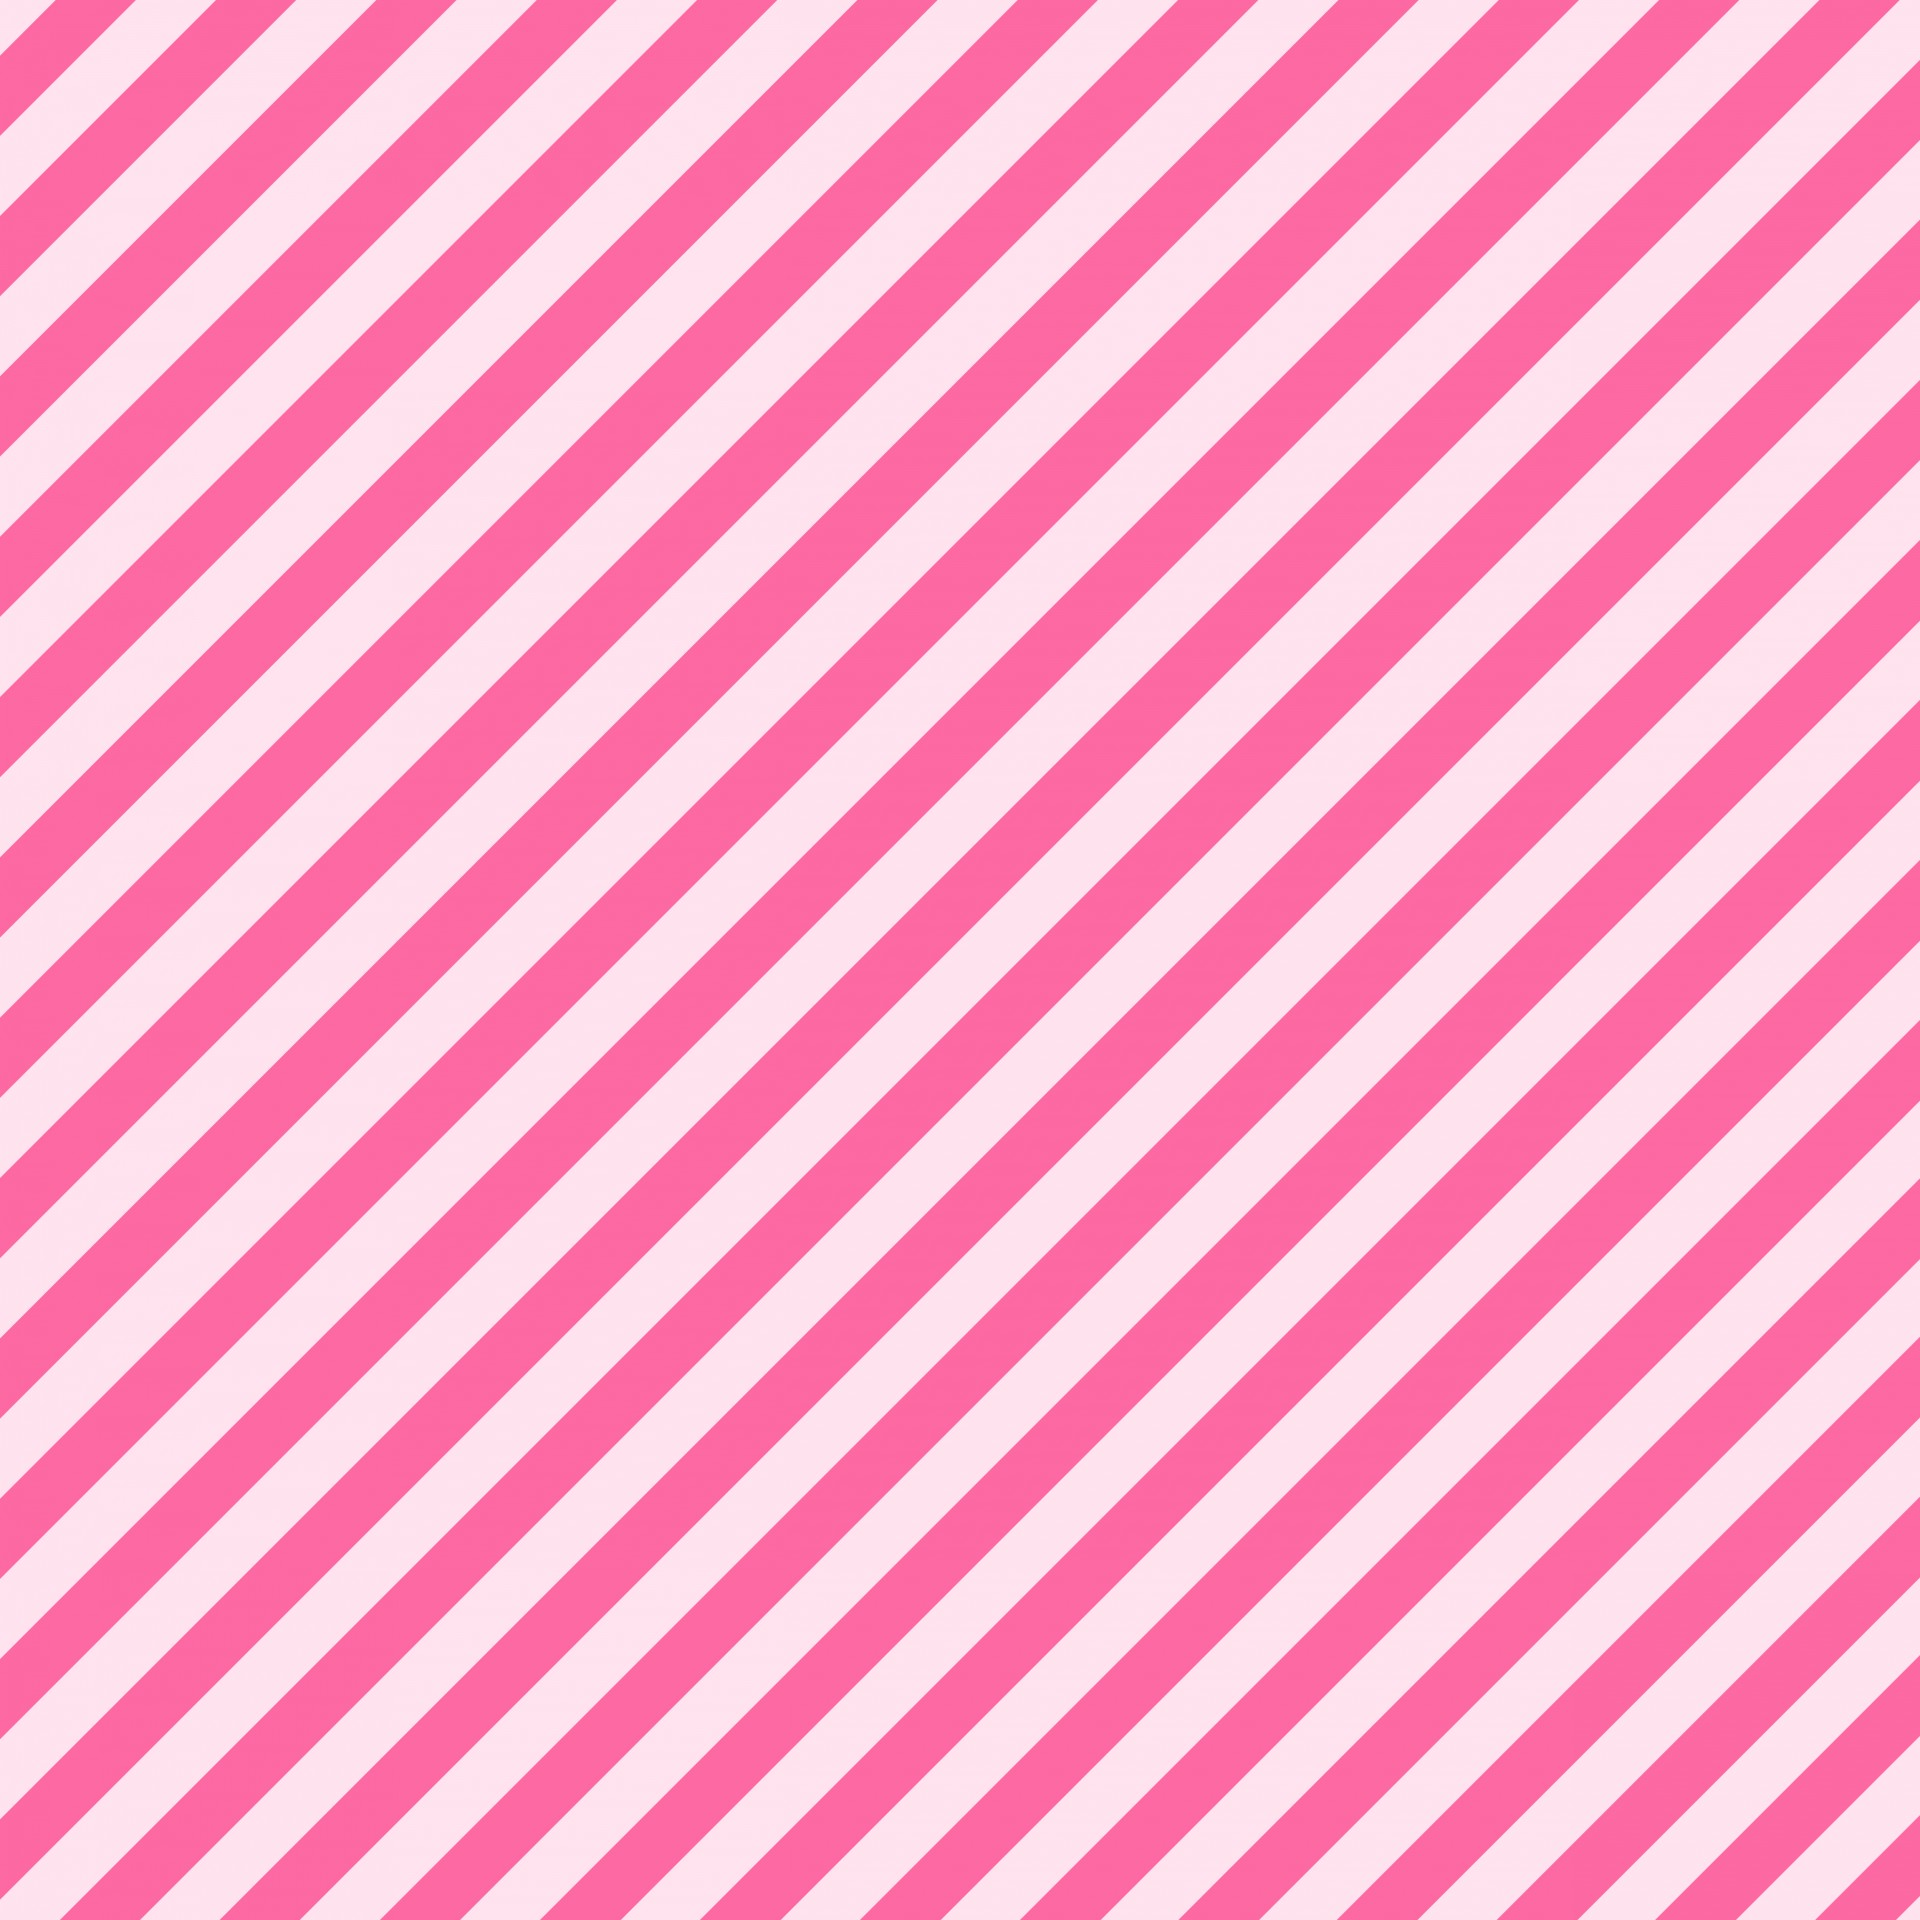 Download free photo of Stripes,striped,stripe,pink,diagonal - from